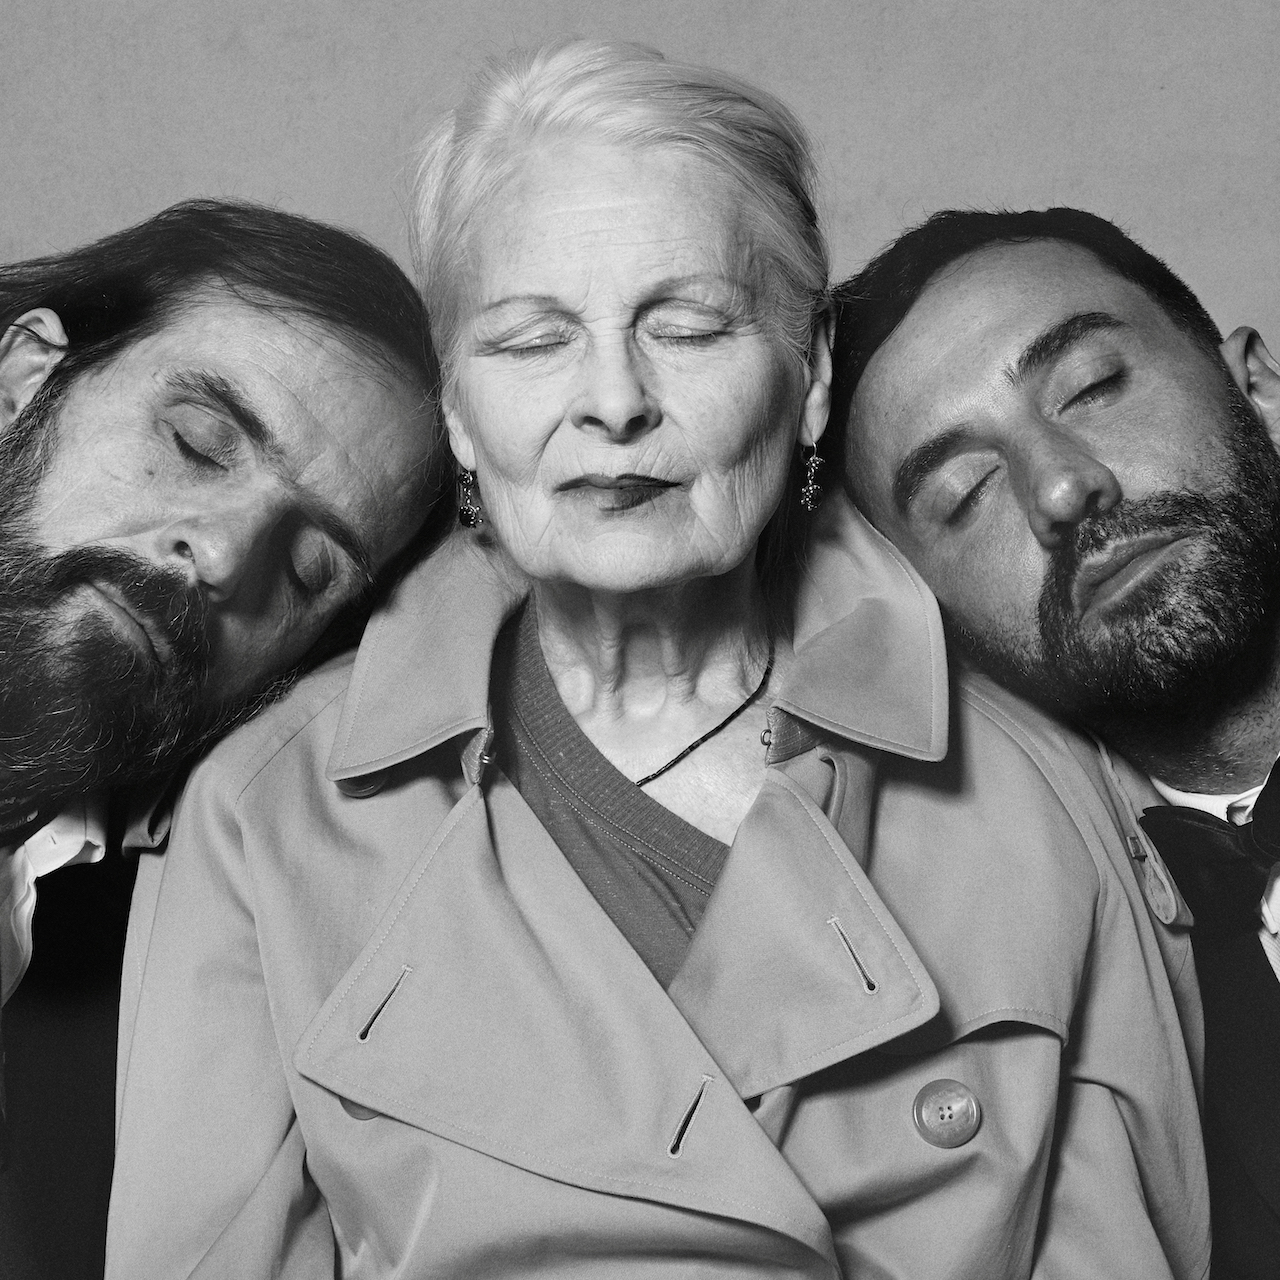 (from left) Riccardo Tisci, Vivienne Westwood and Andreas Kronthaler (credit: Courtesy of Burberry_ Brett Lloyd)